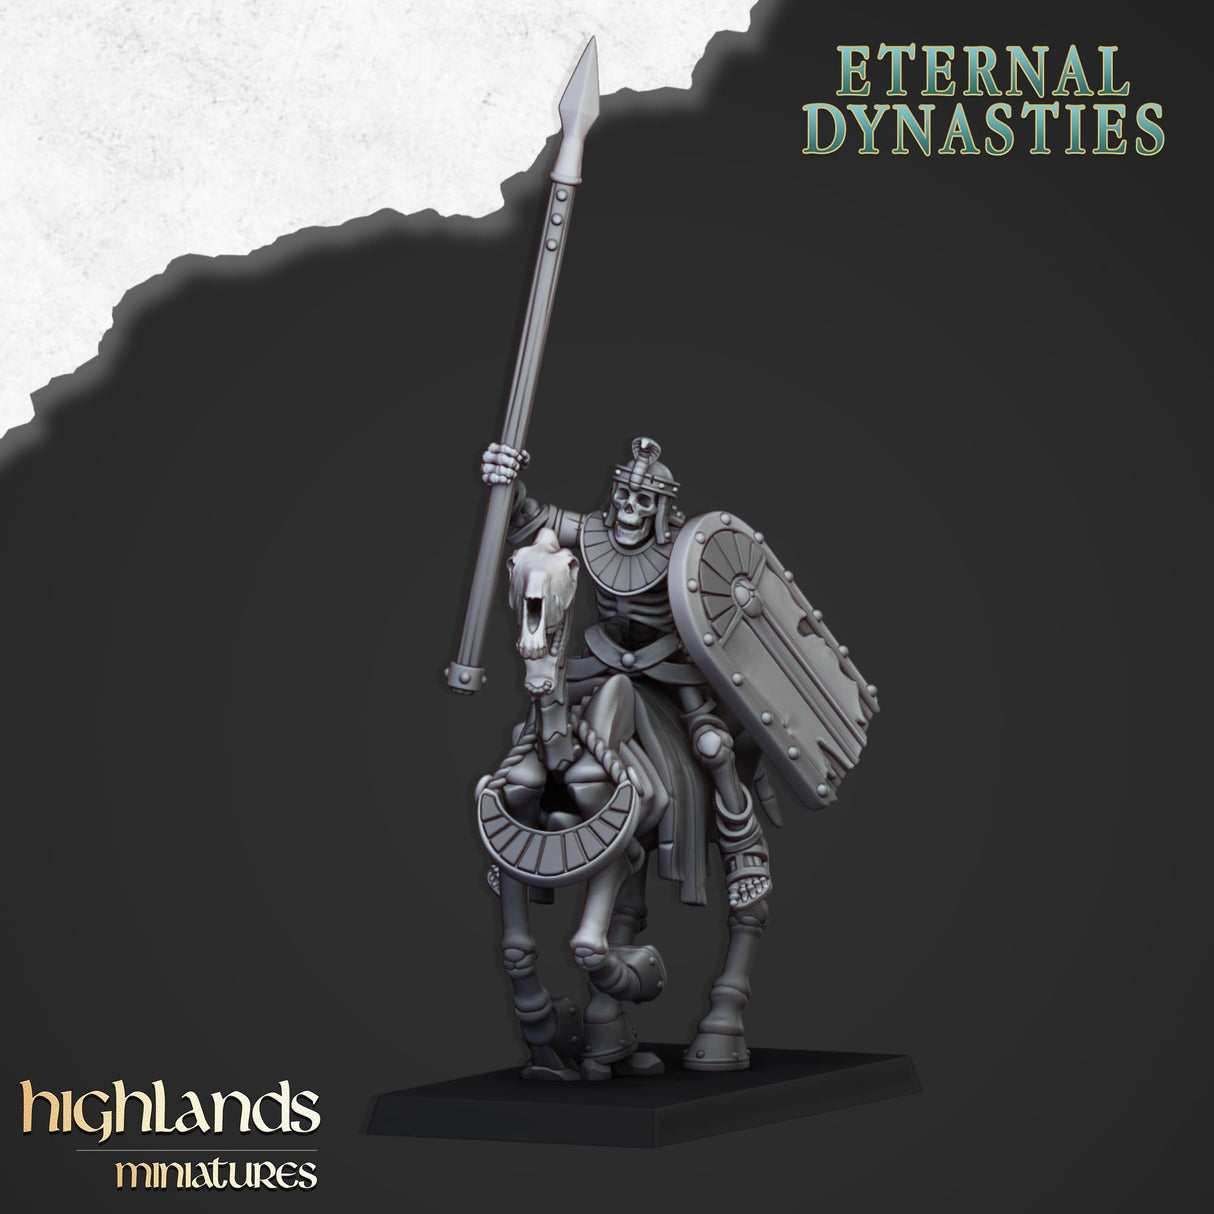 Highlands Miniatures Ancient Skeletal Cavalry with spears - BrodaForge